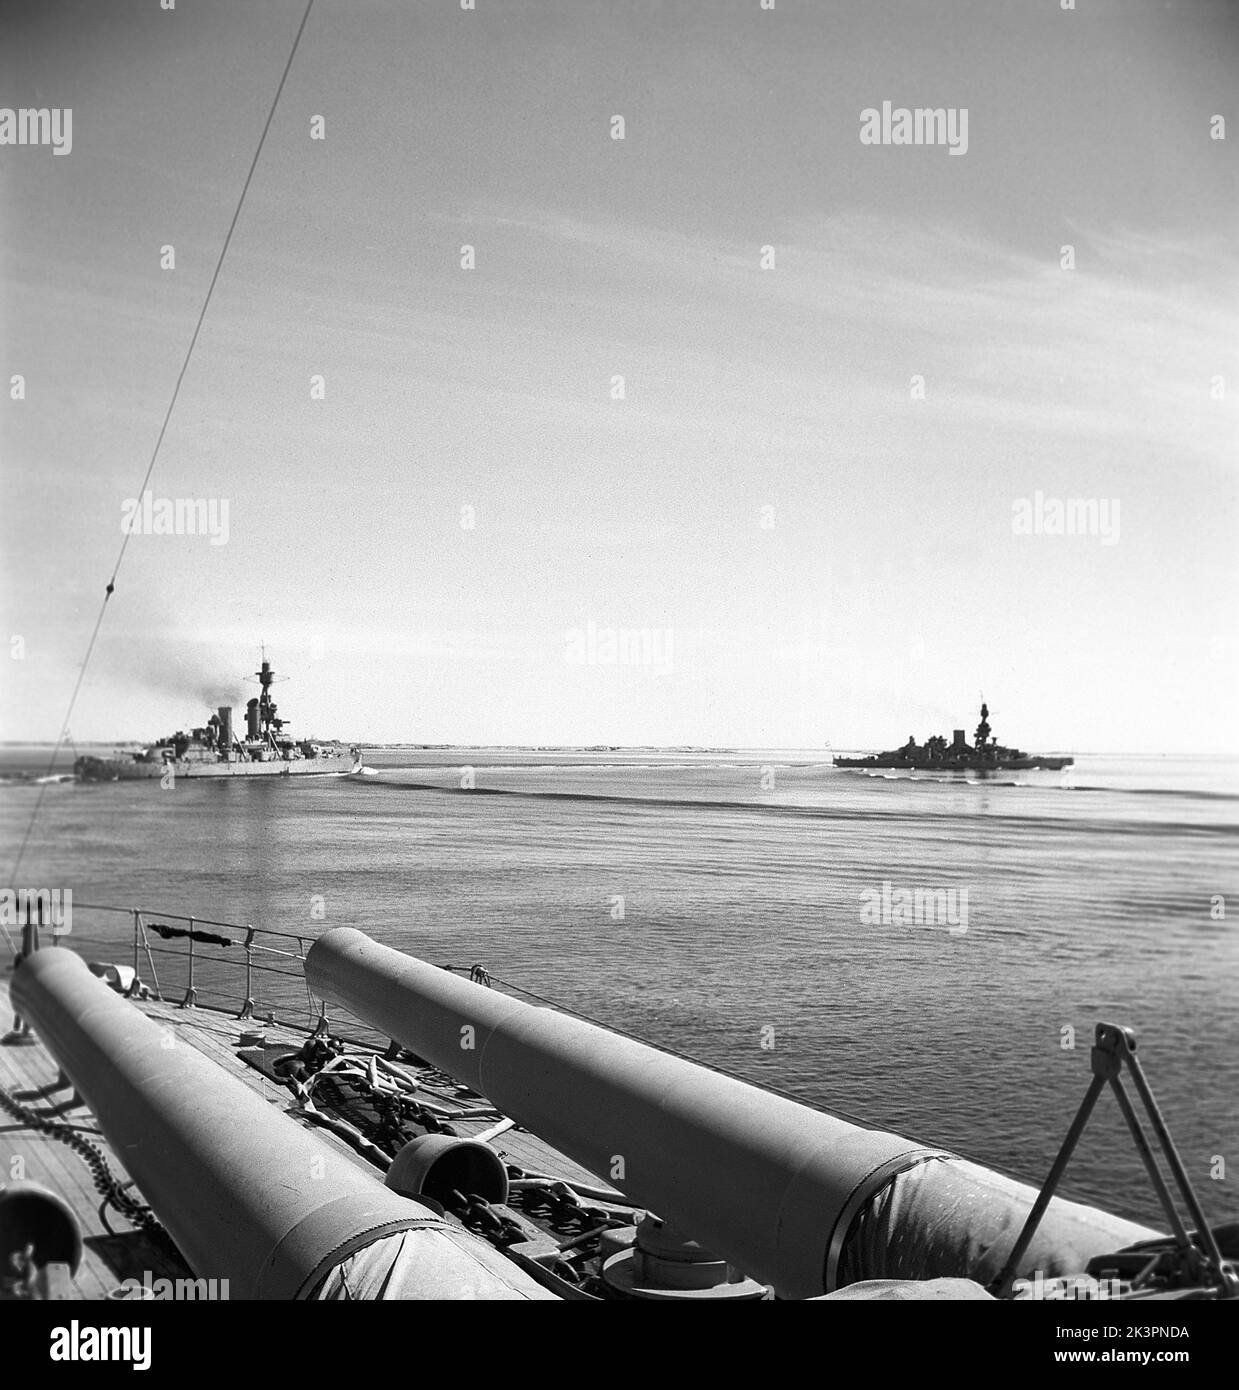 During World war II. The war ship Sverige during navy exercises at sea. The front cannons are visible with other swedish warships visible in the background. Sweden june 1940. Kristoffersson ref 141 Stock Photo